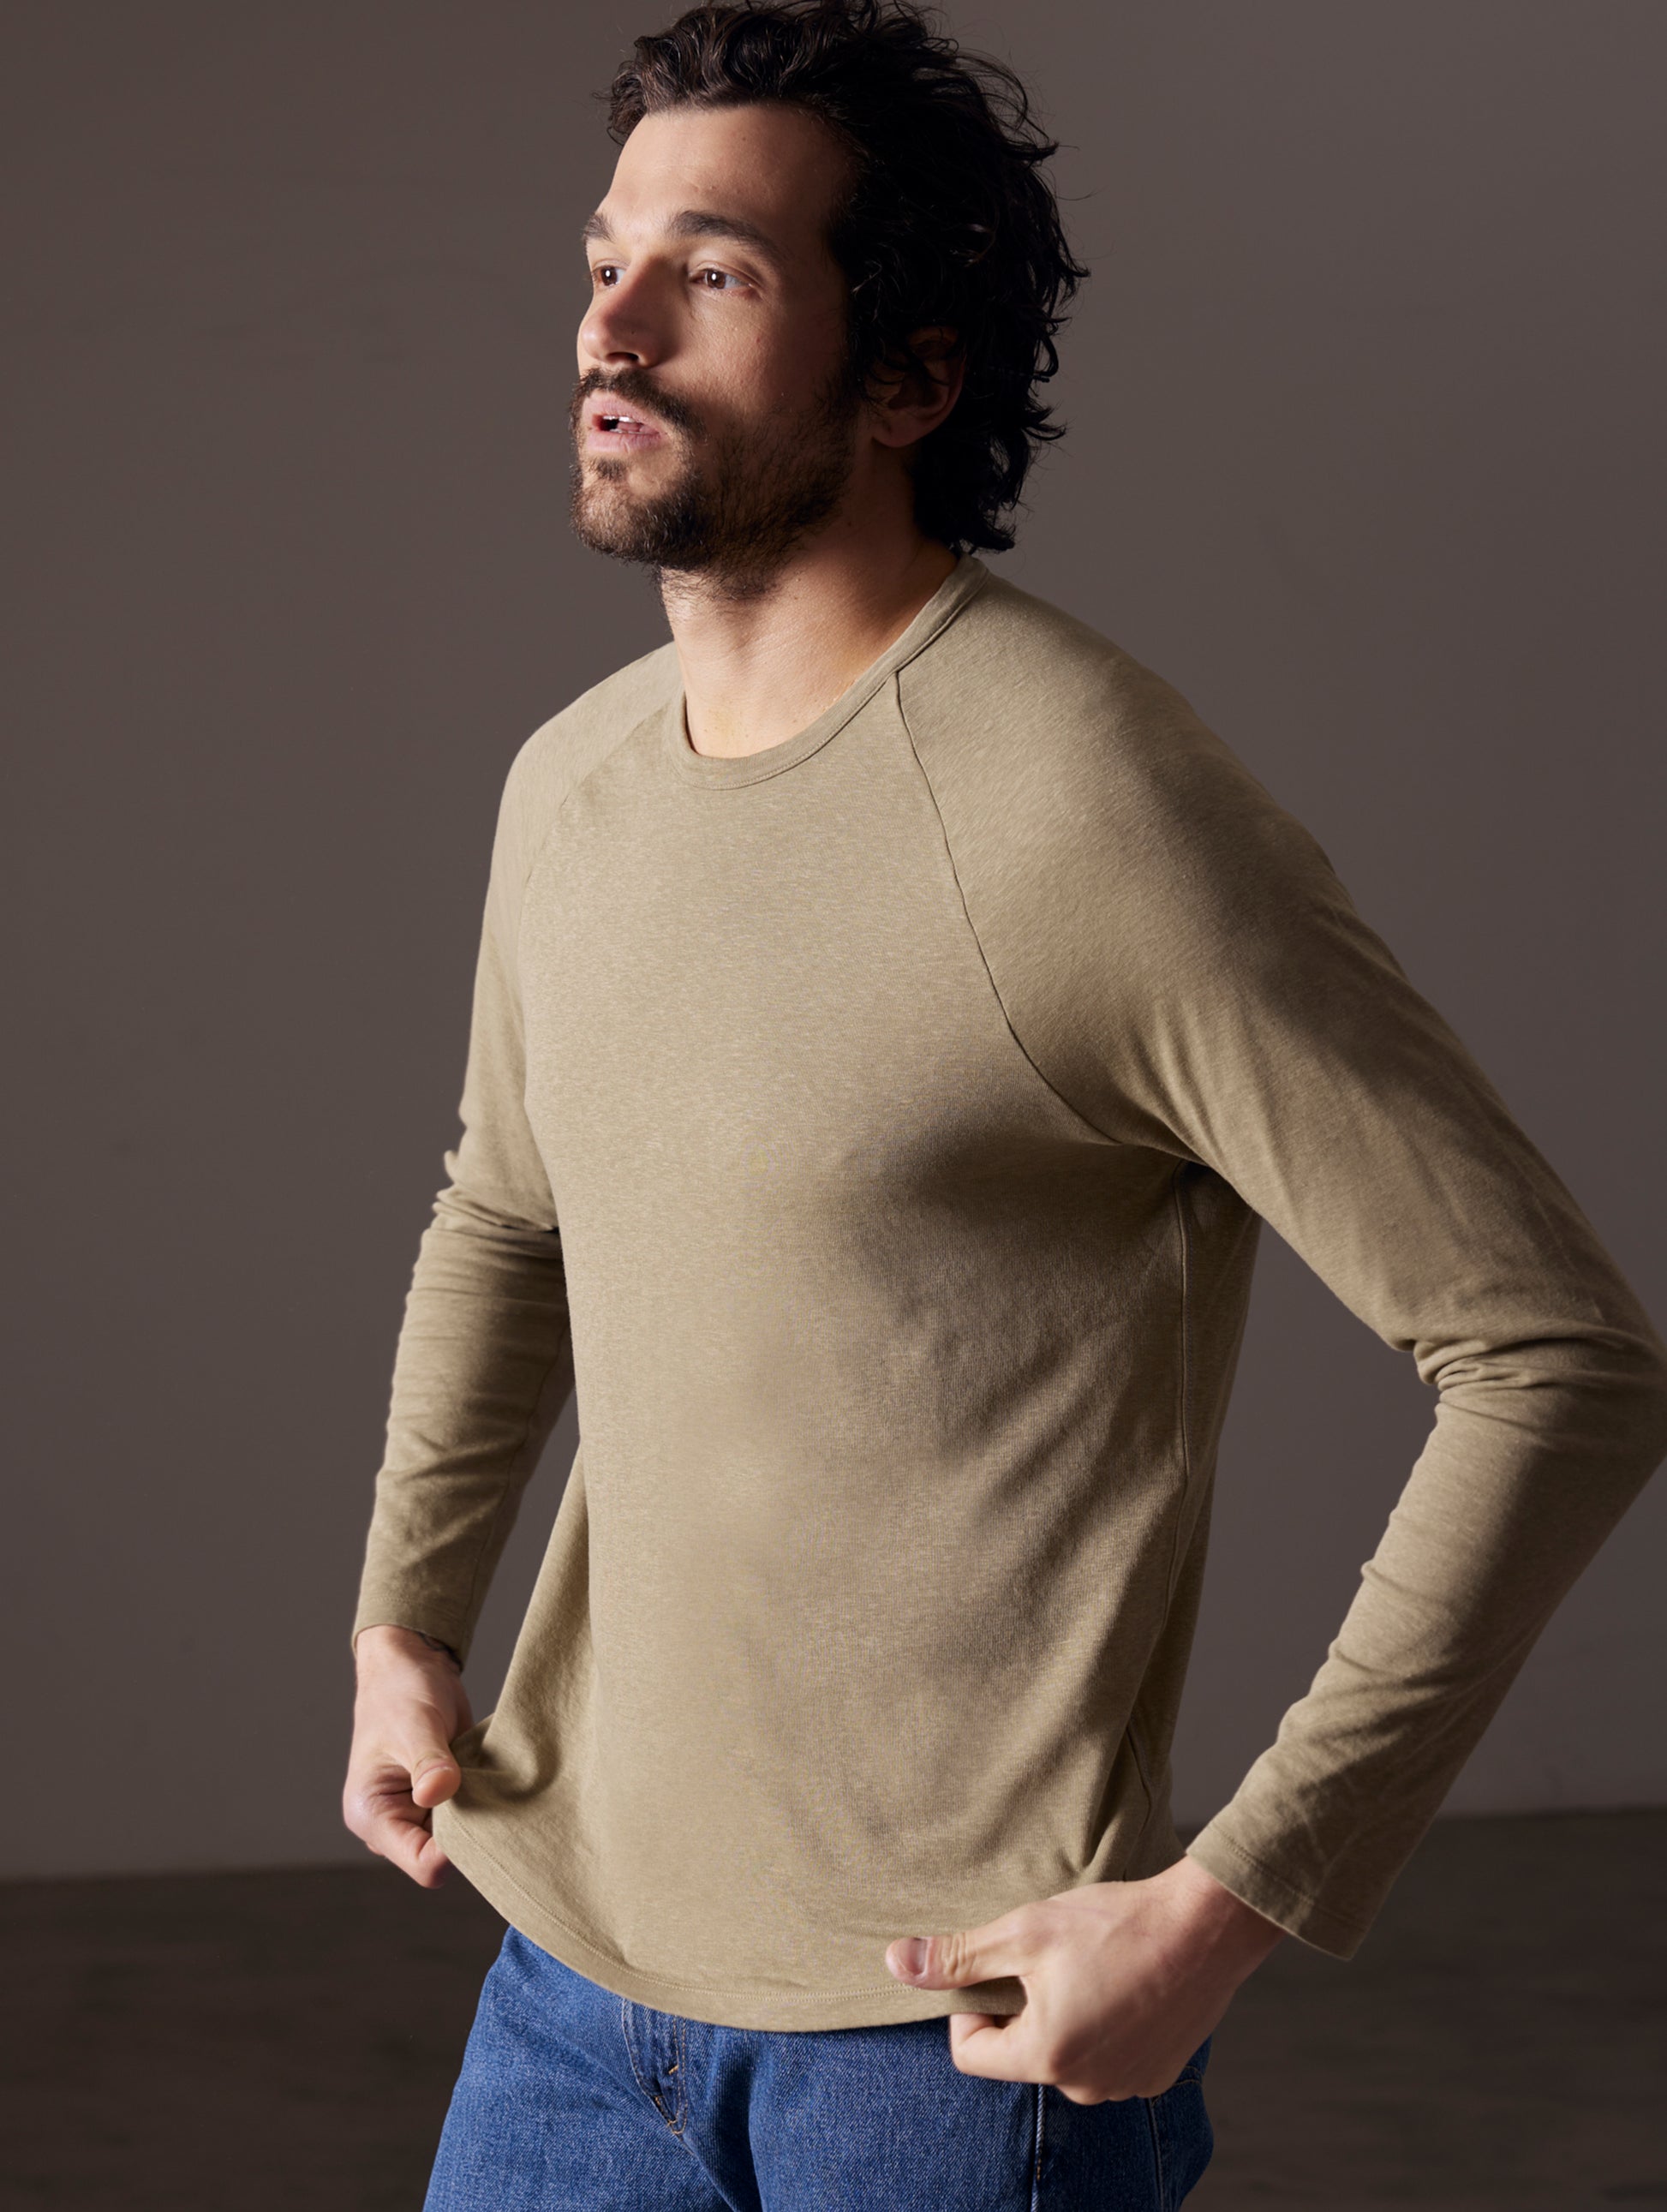 man wearing green long-sleeve shirt from AETHER Apparel